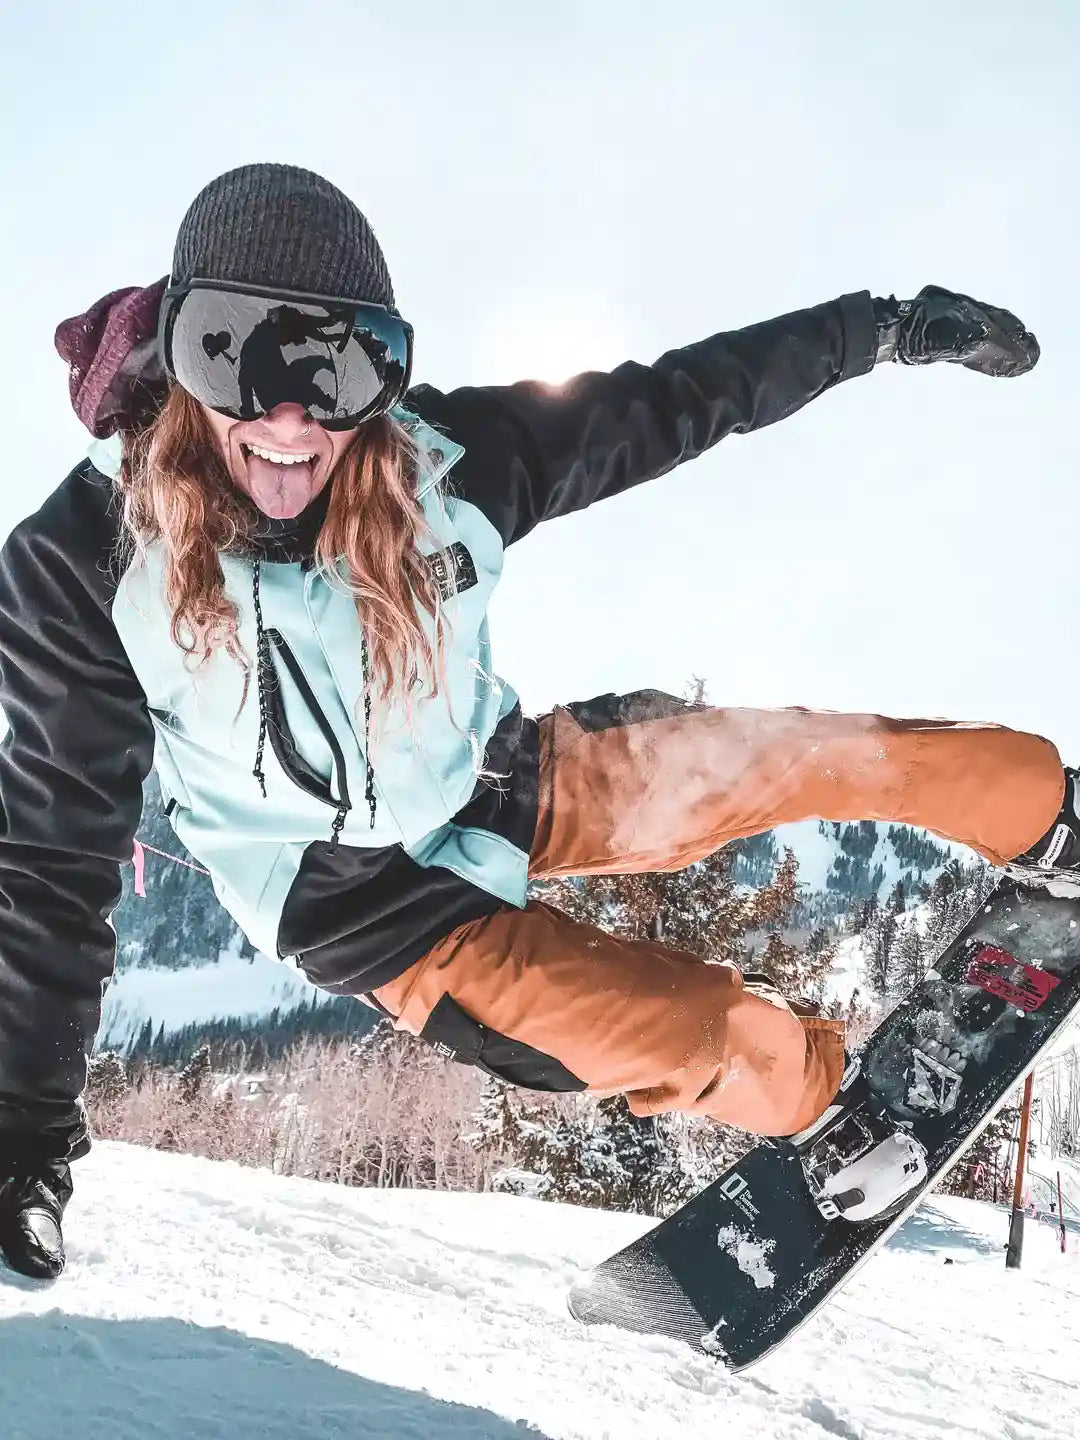 snowboarder goofing around while snowboarding and wearing roca ski goggles